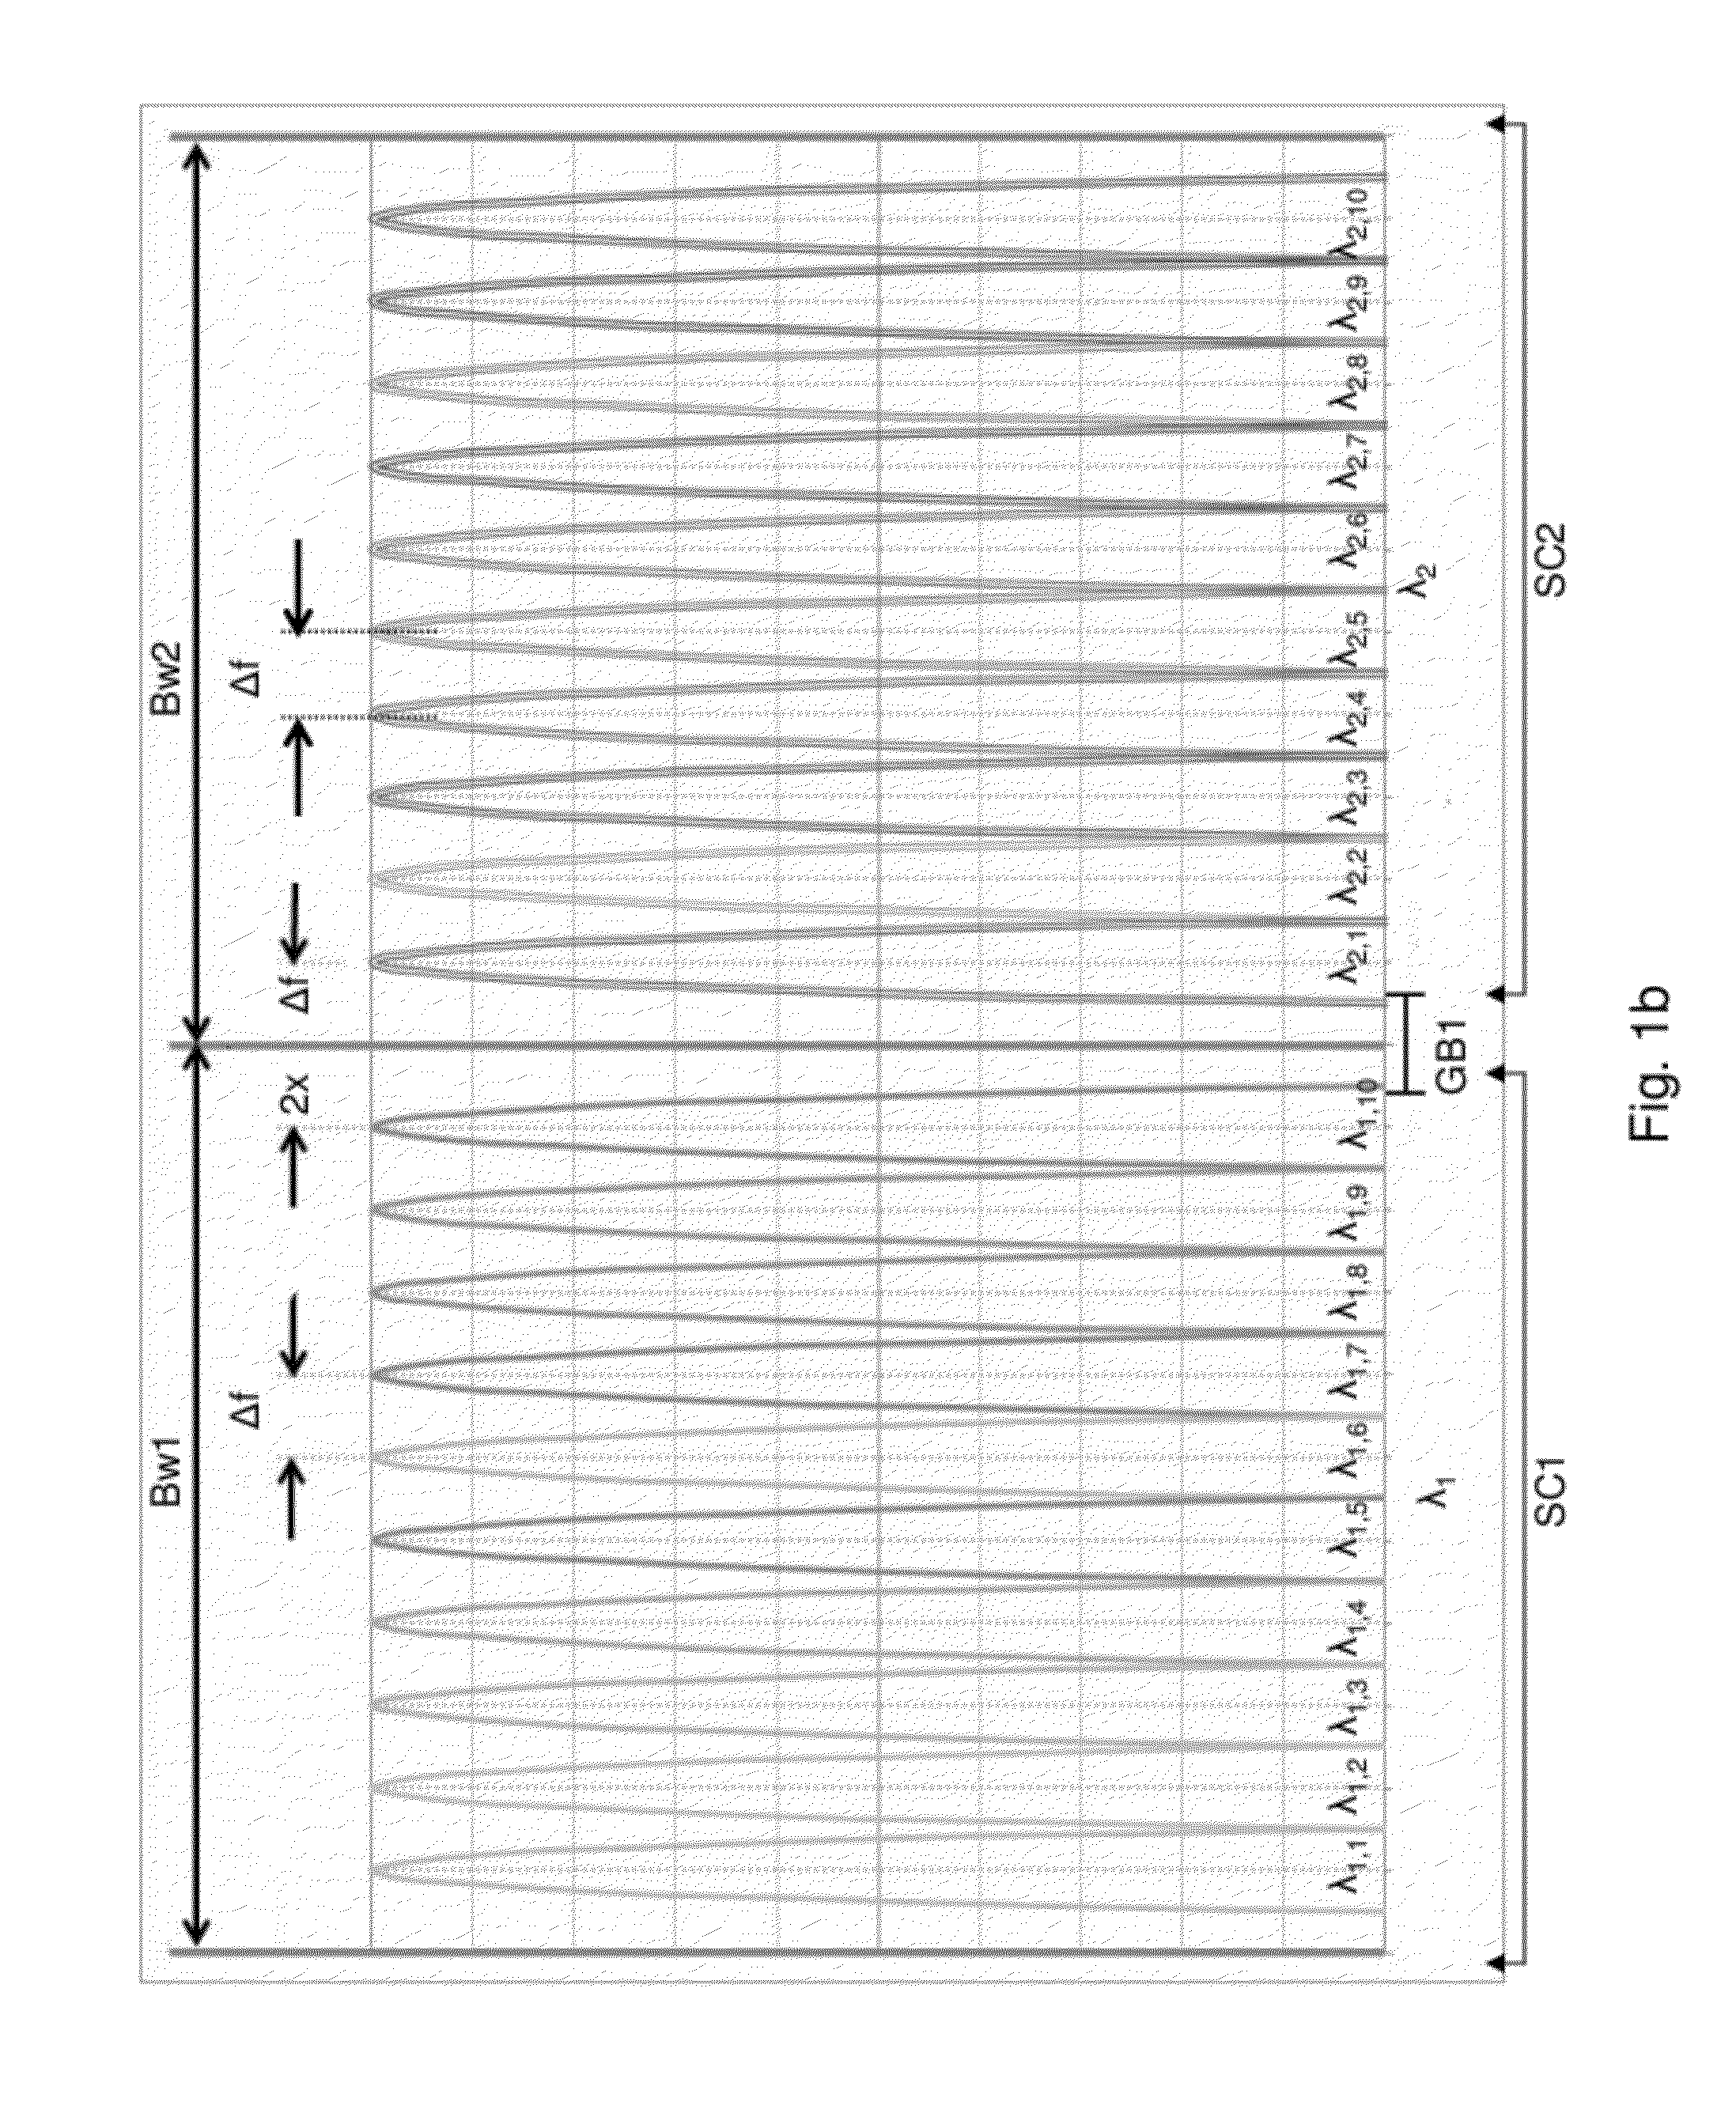 Periodic Superchannel Carrier Arrangement for Optical Communication Systems